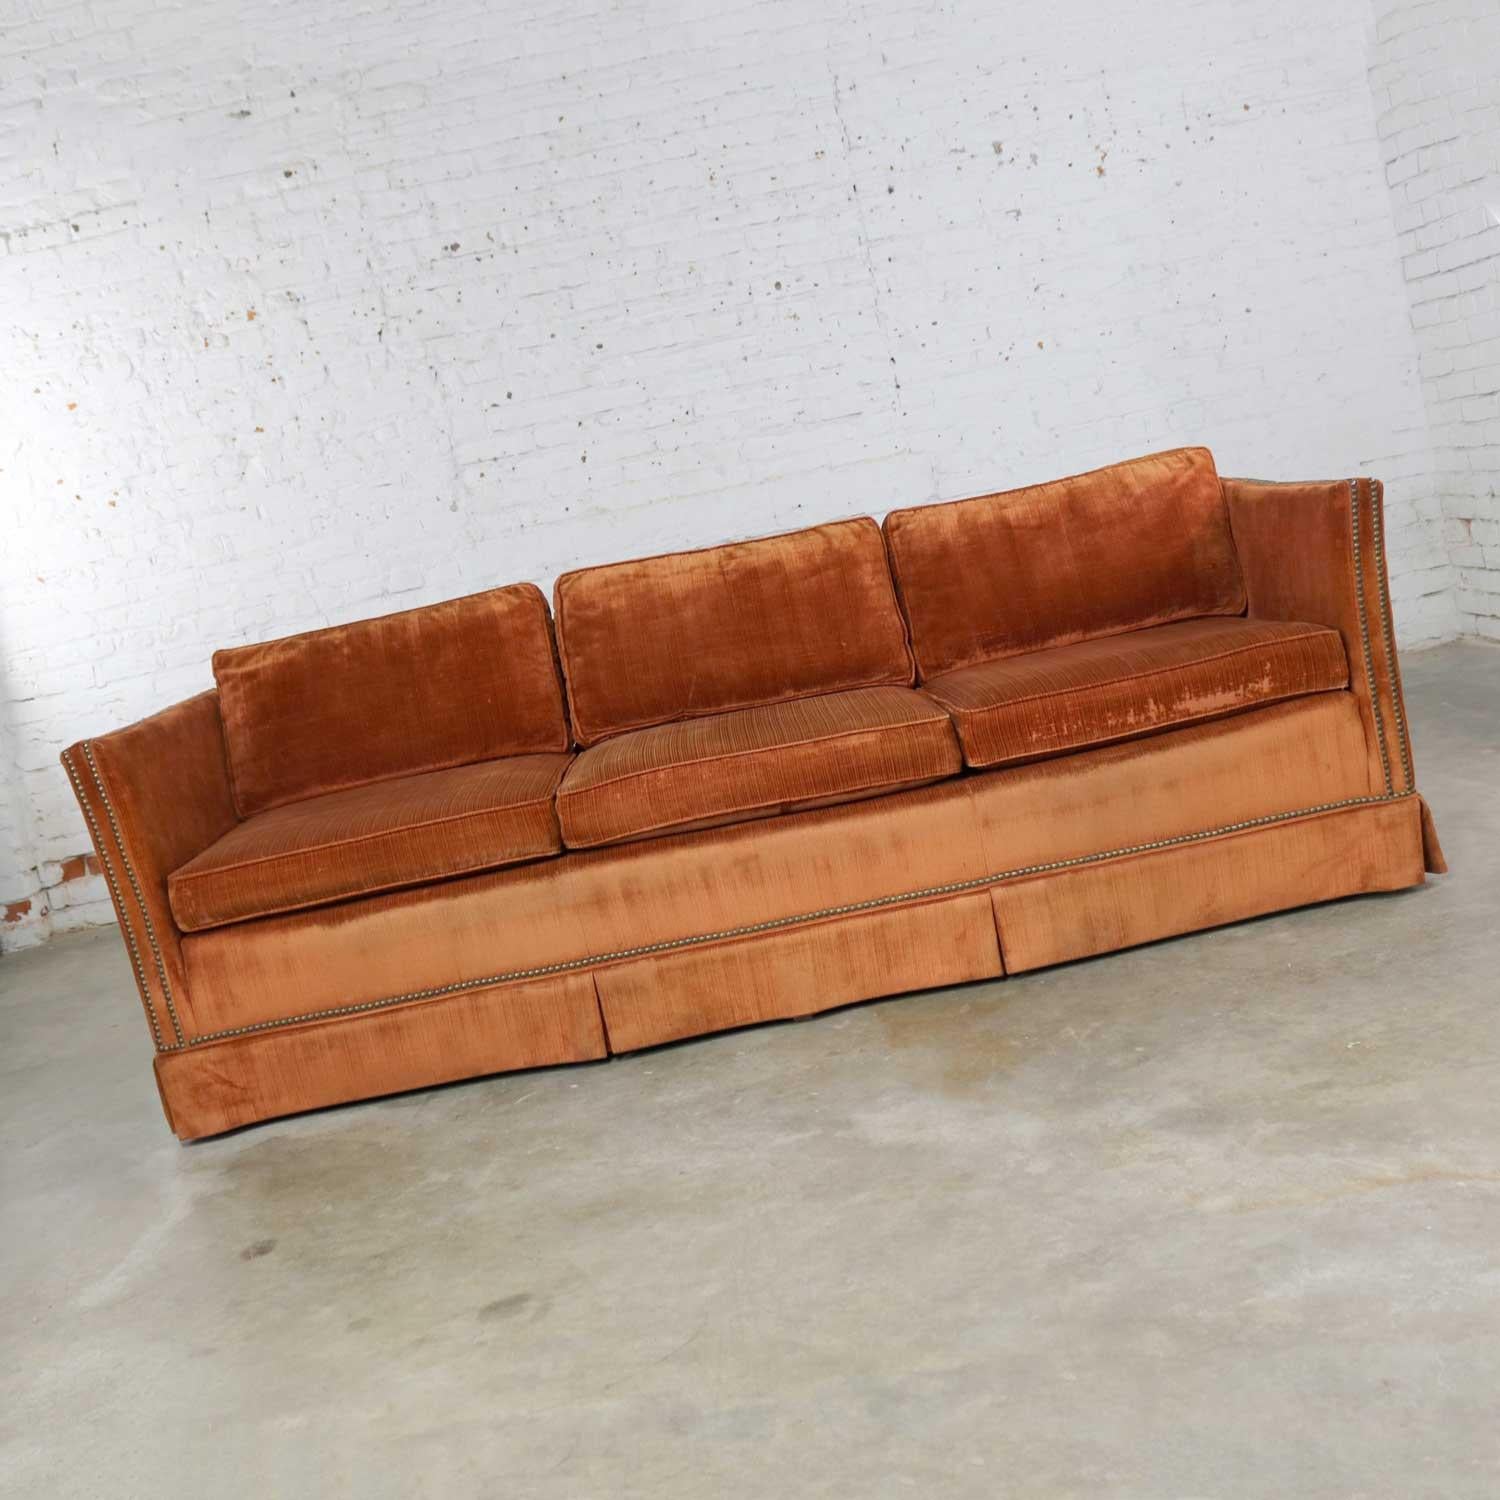 Handsome burnt orange velvet mid-century Hollywood Regency style tuxedo sofa with bronze tone nailhead detail. There is no tag, but it is very nicely made. It is in great usable vintage condition and has been recently cleaned. The awesome original